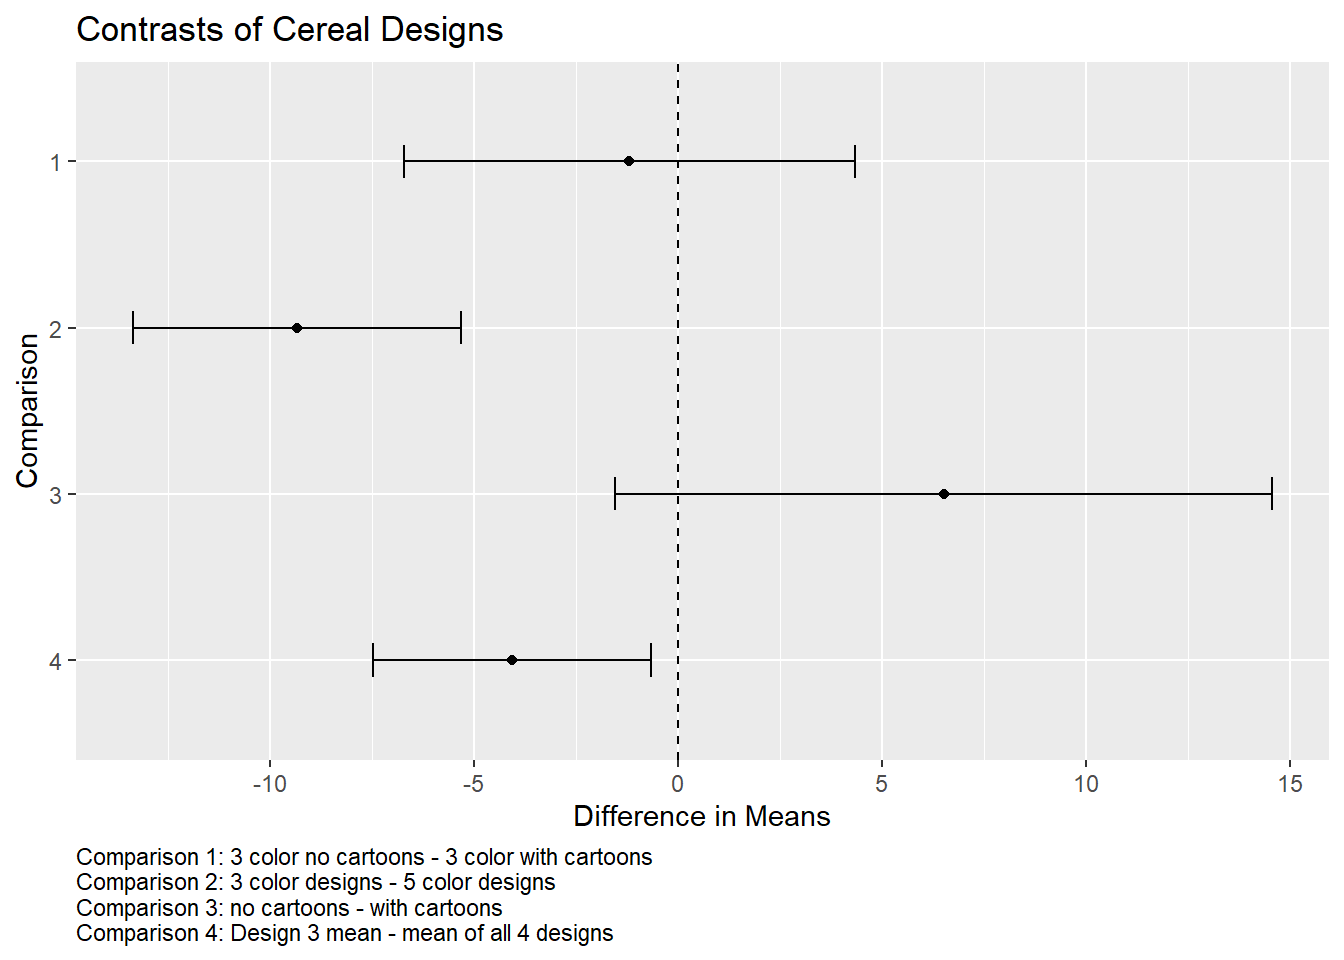 custom contrast results and confidence intervals with clear labels for different contrasts